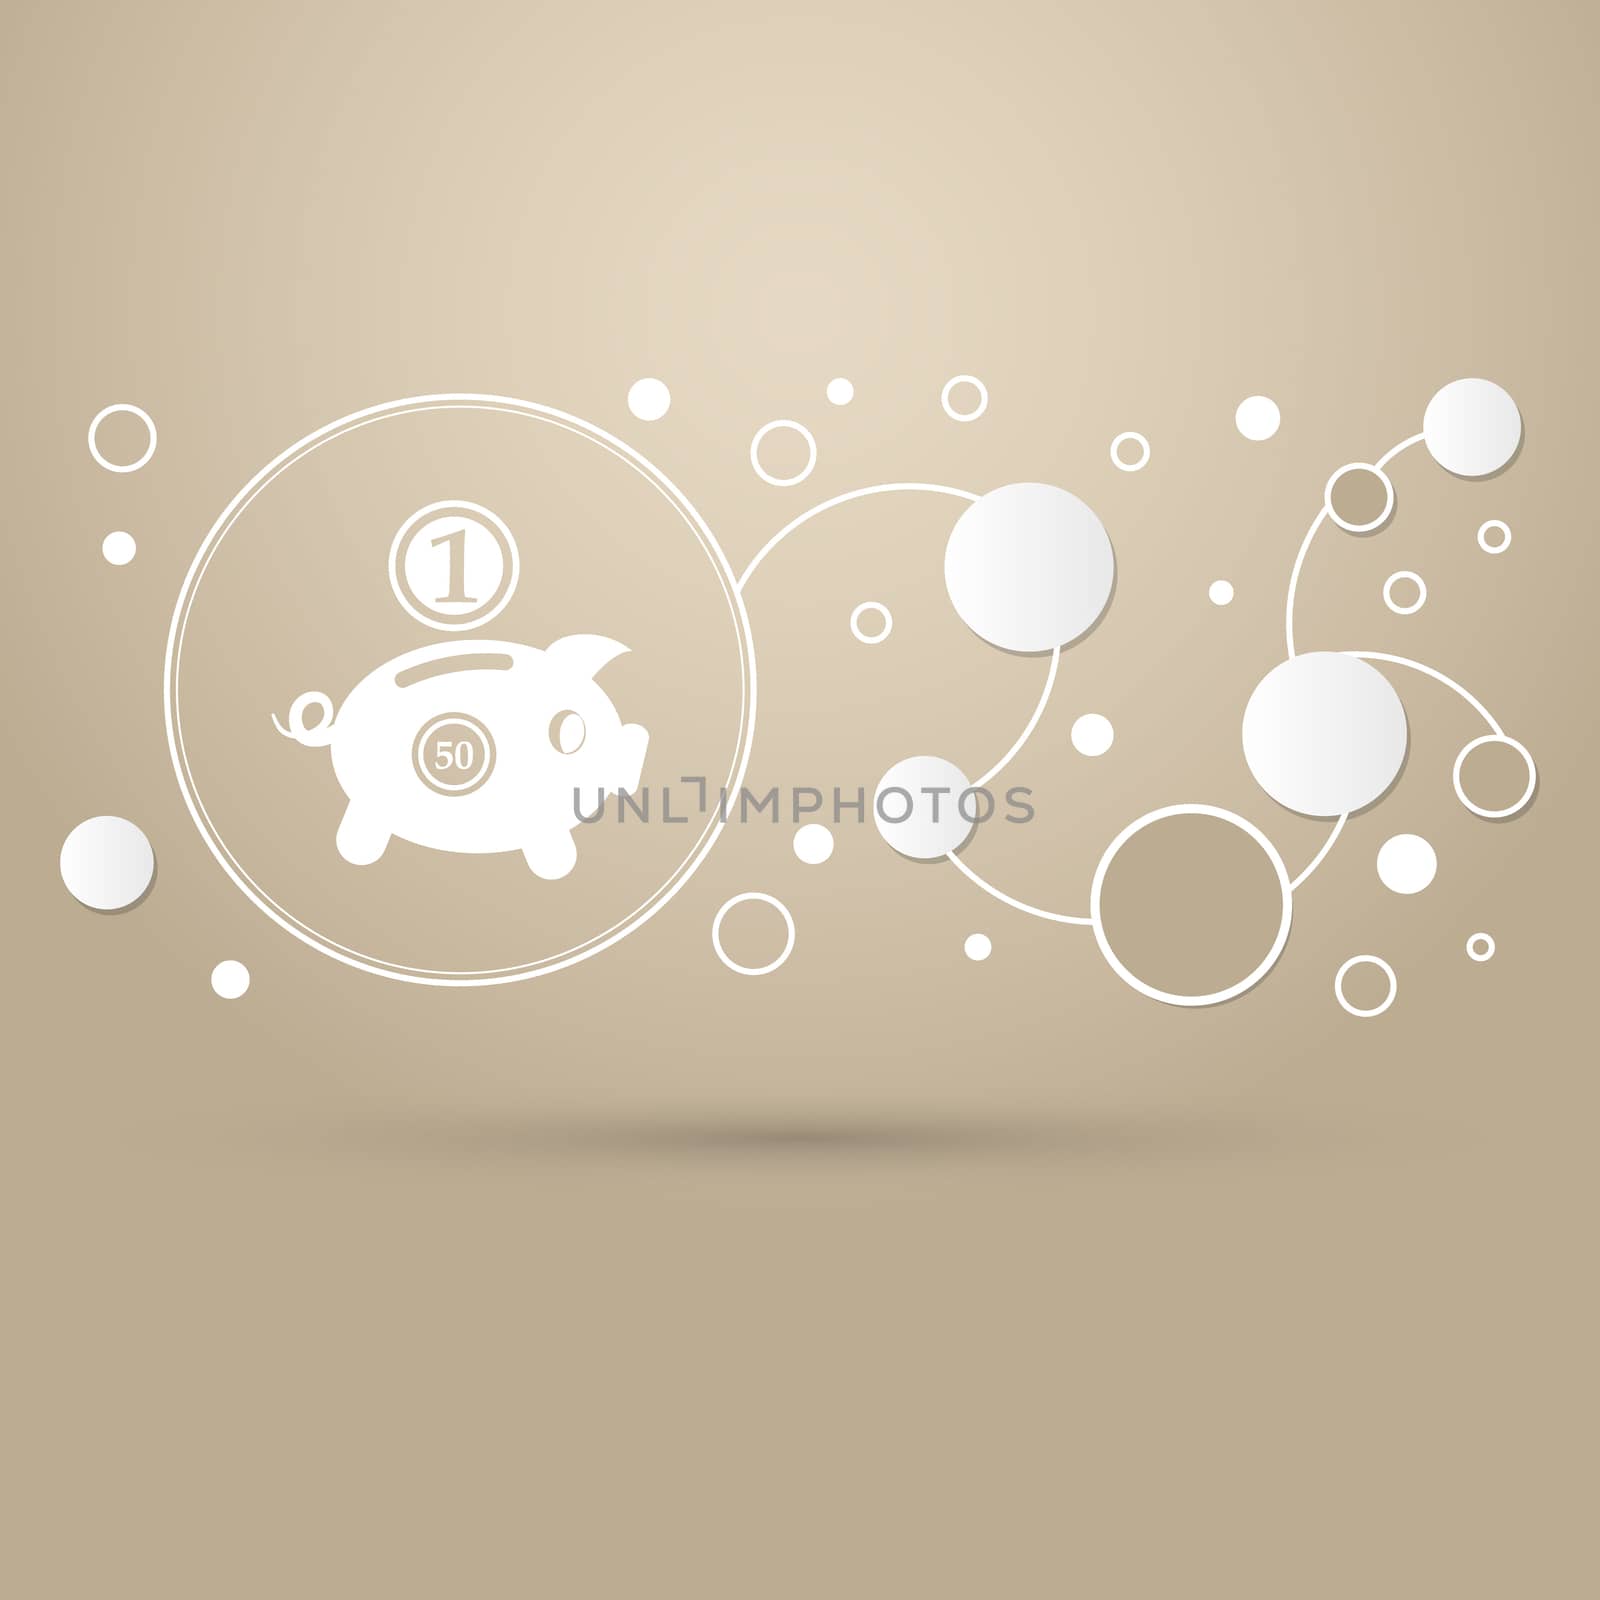 Piggy bank and dollar coin icon on a brown background with elegant style and modern design infographic. illustration